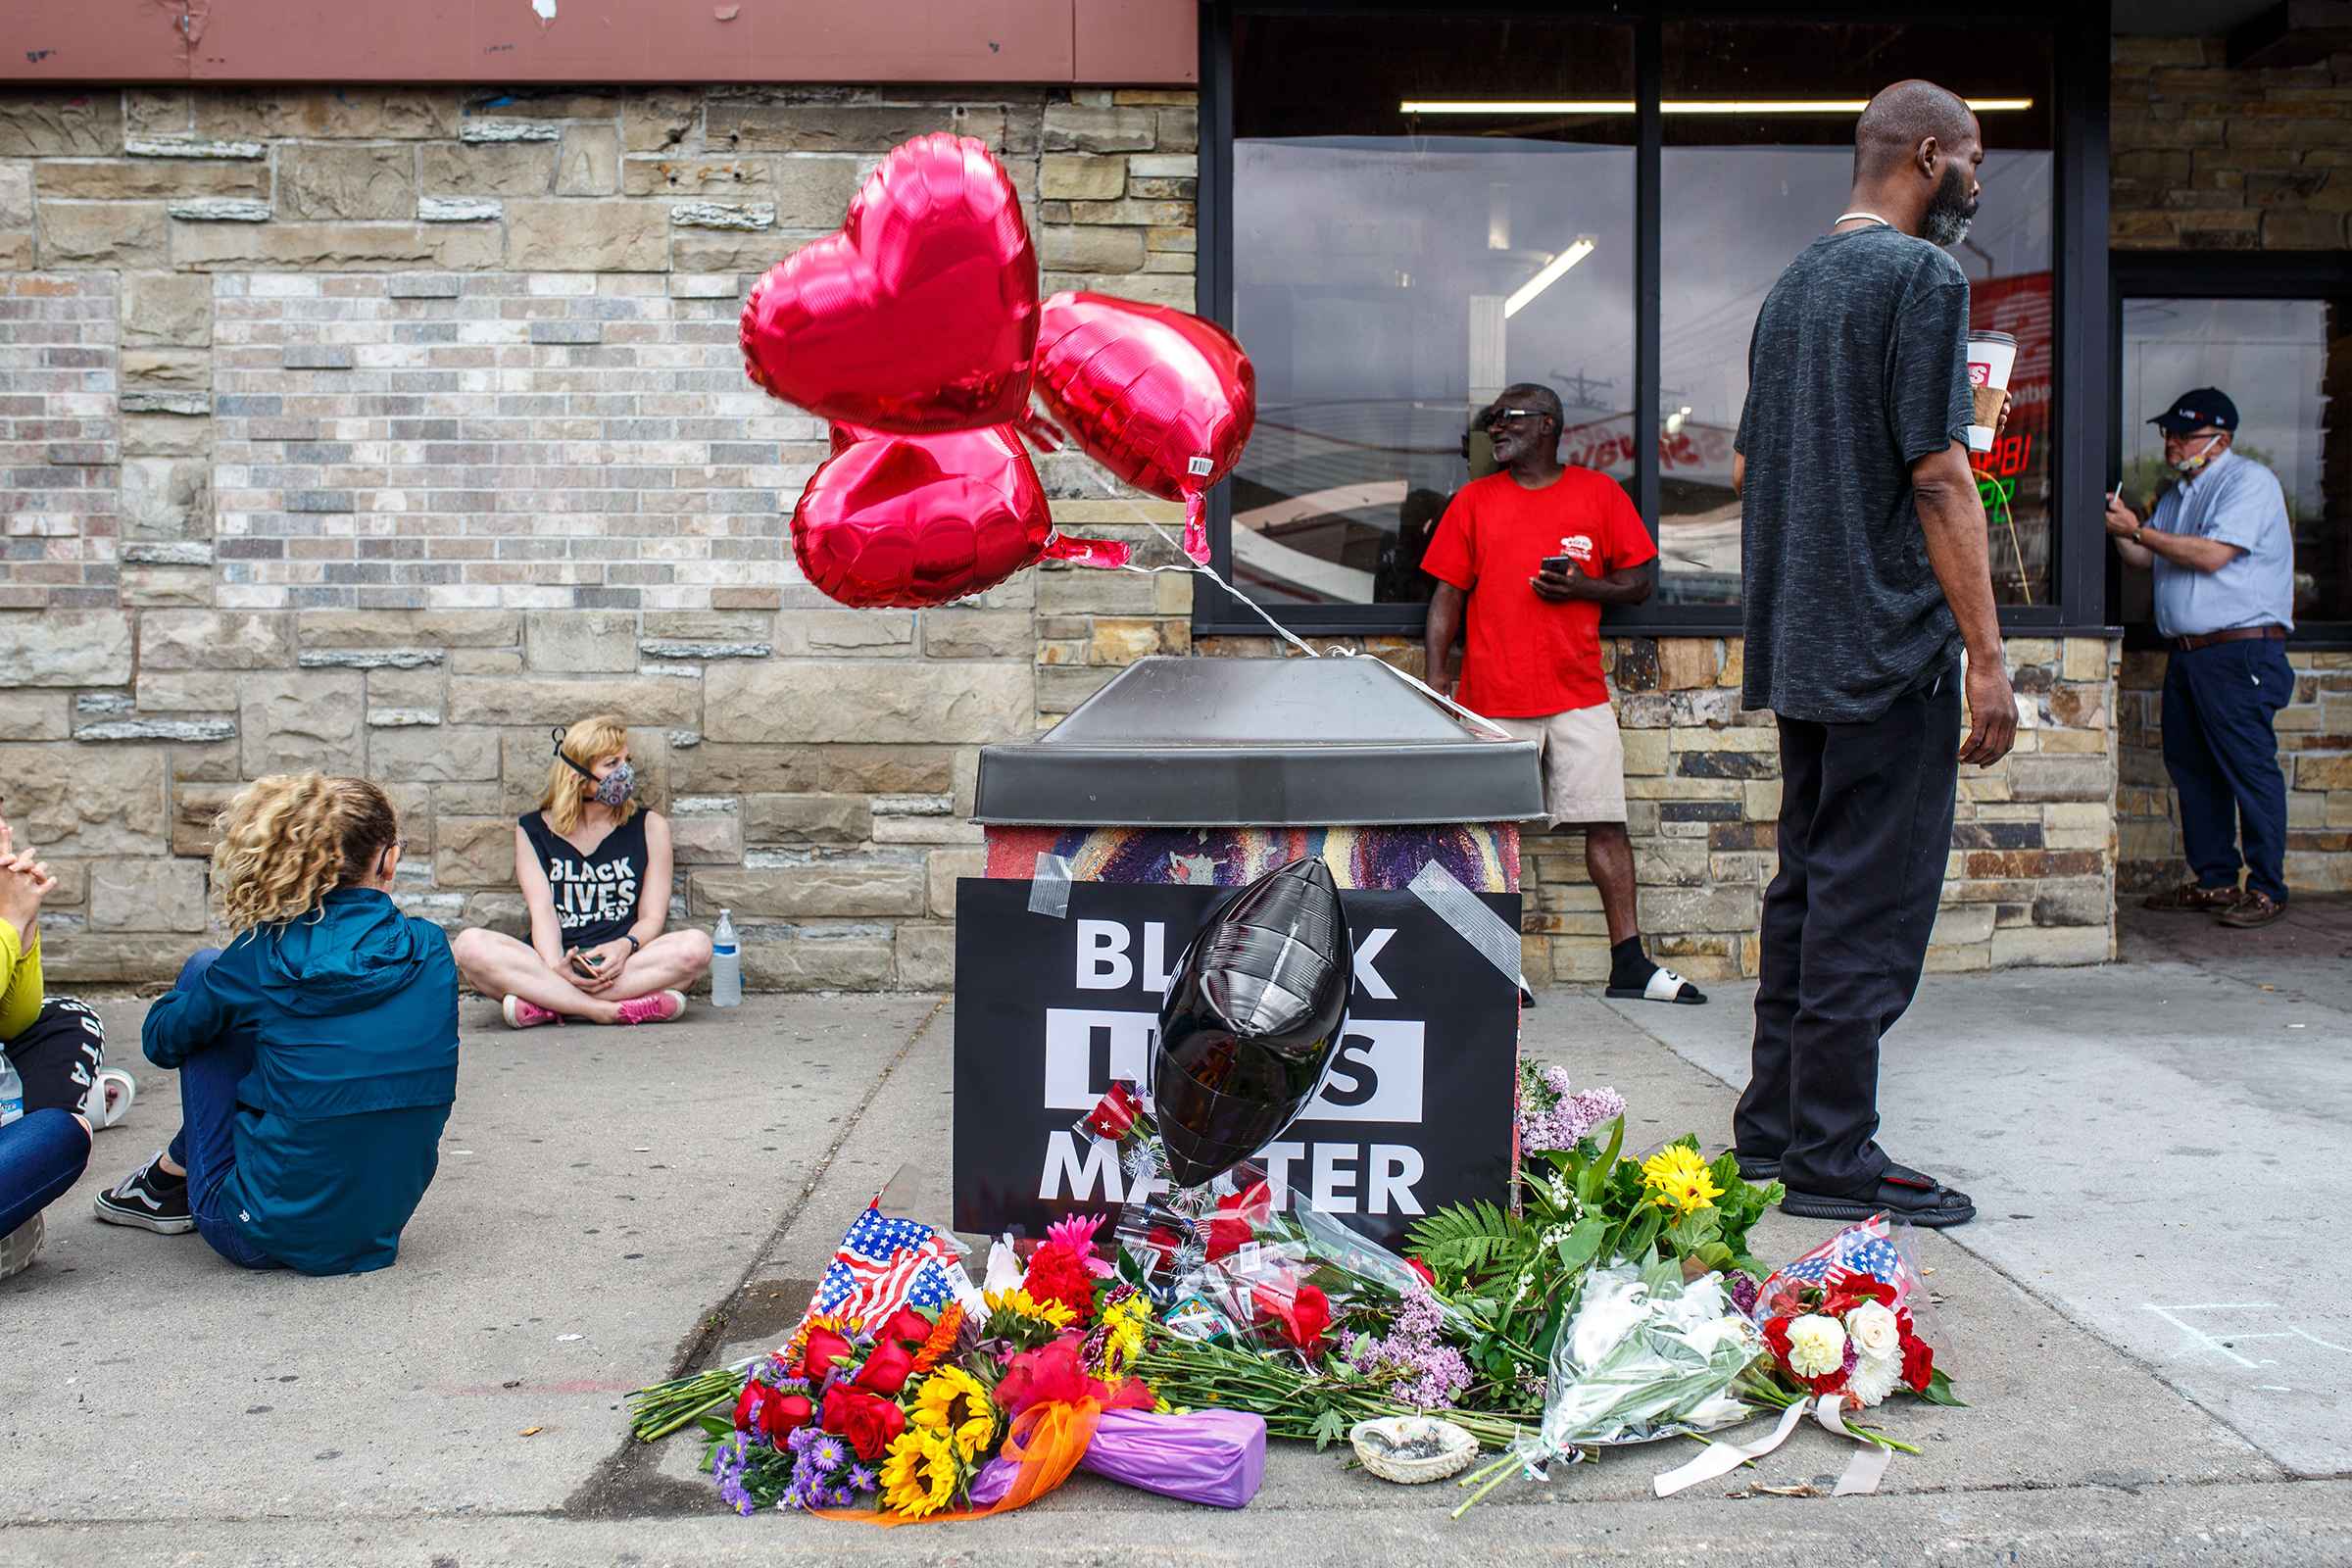 A memorial left for George Floyd, at the scene where an officer pinned him down a day earlier, in Minneapolis on May 26. (Kerem Yucel—AFP/Getty Images)